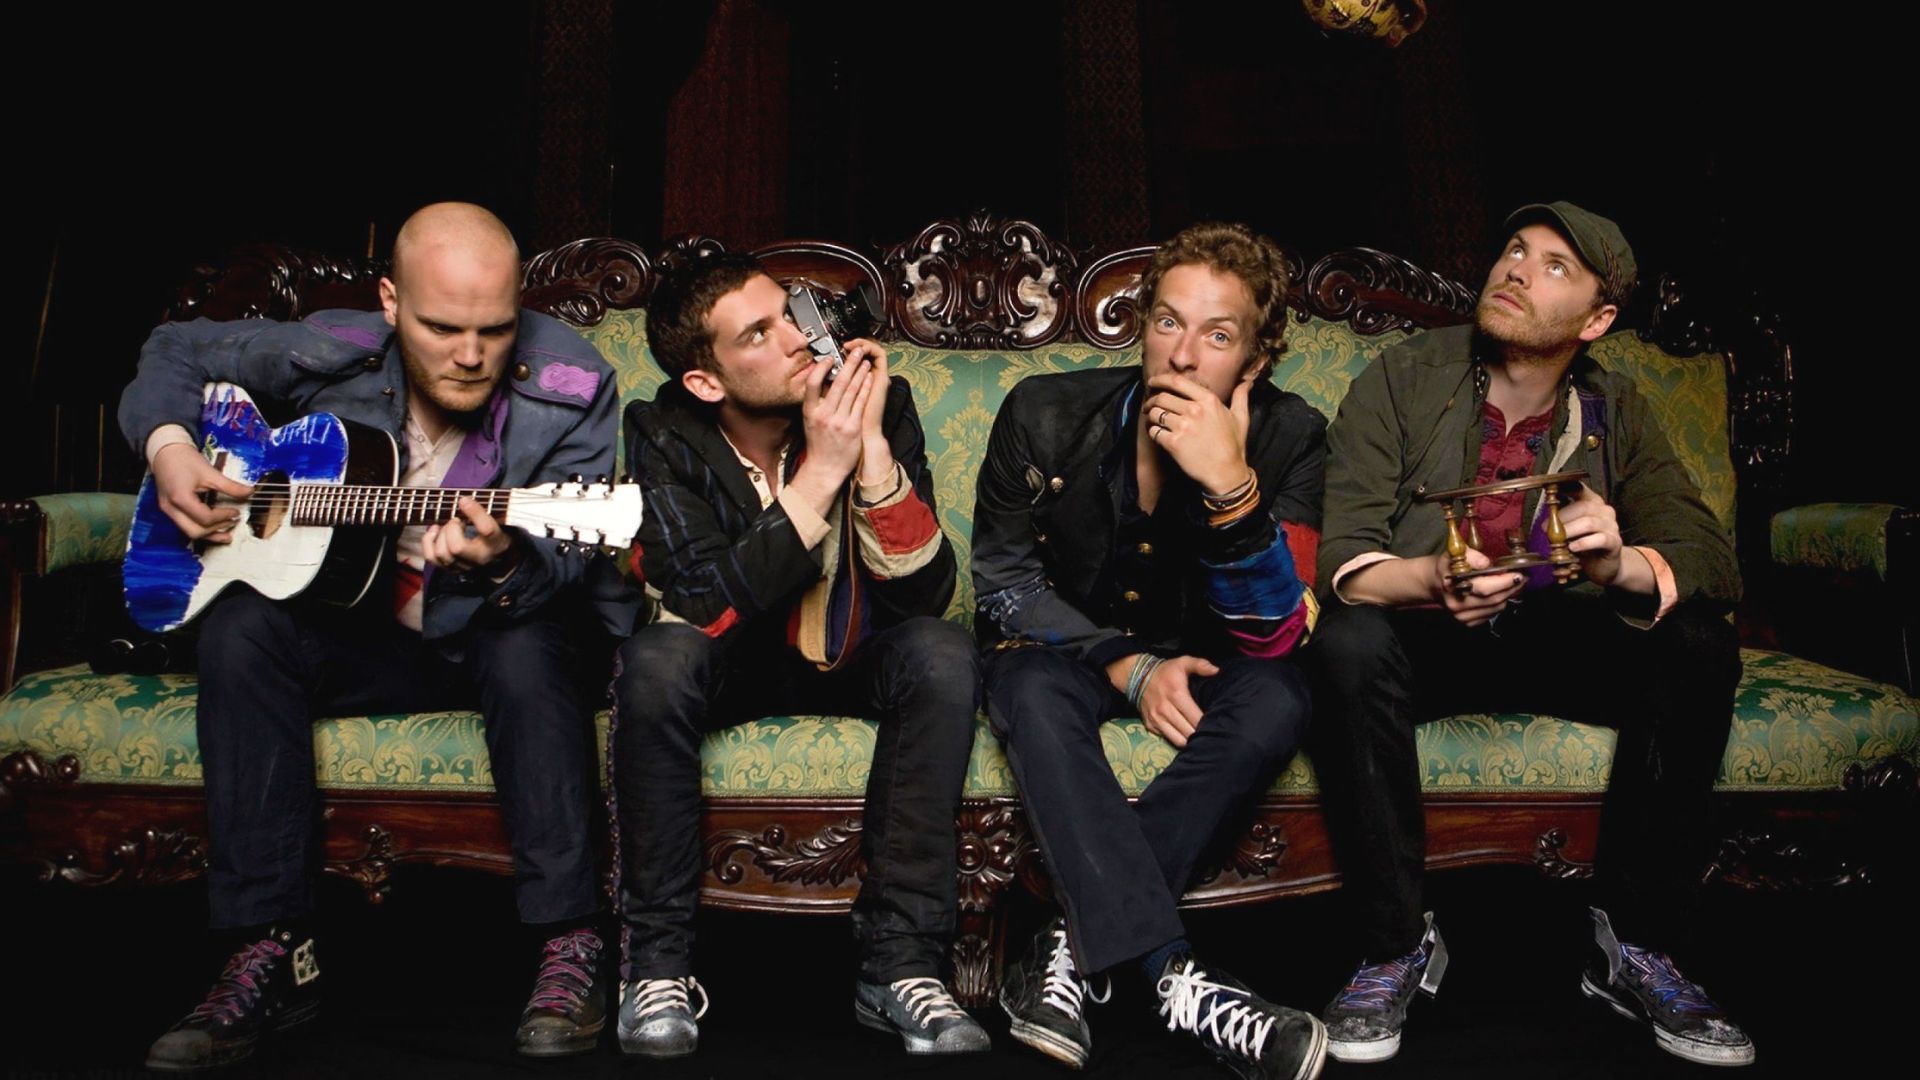 27 Fun Facts About Coldplay - The Fact Site